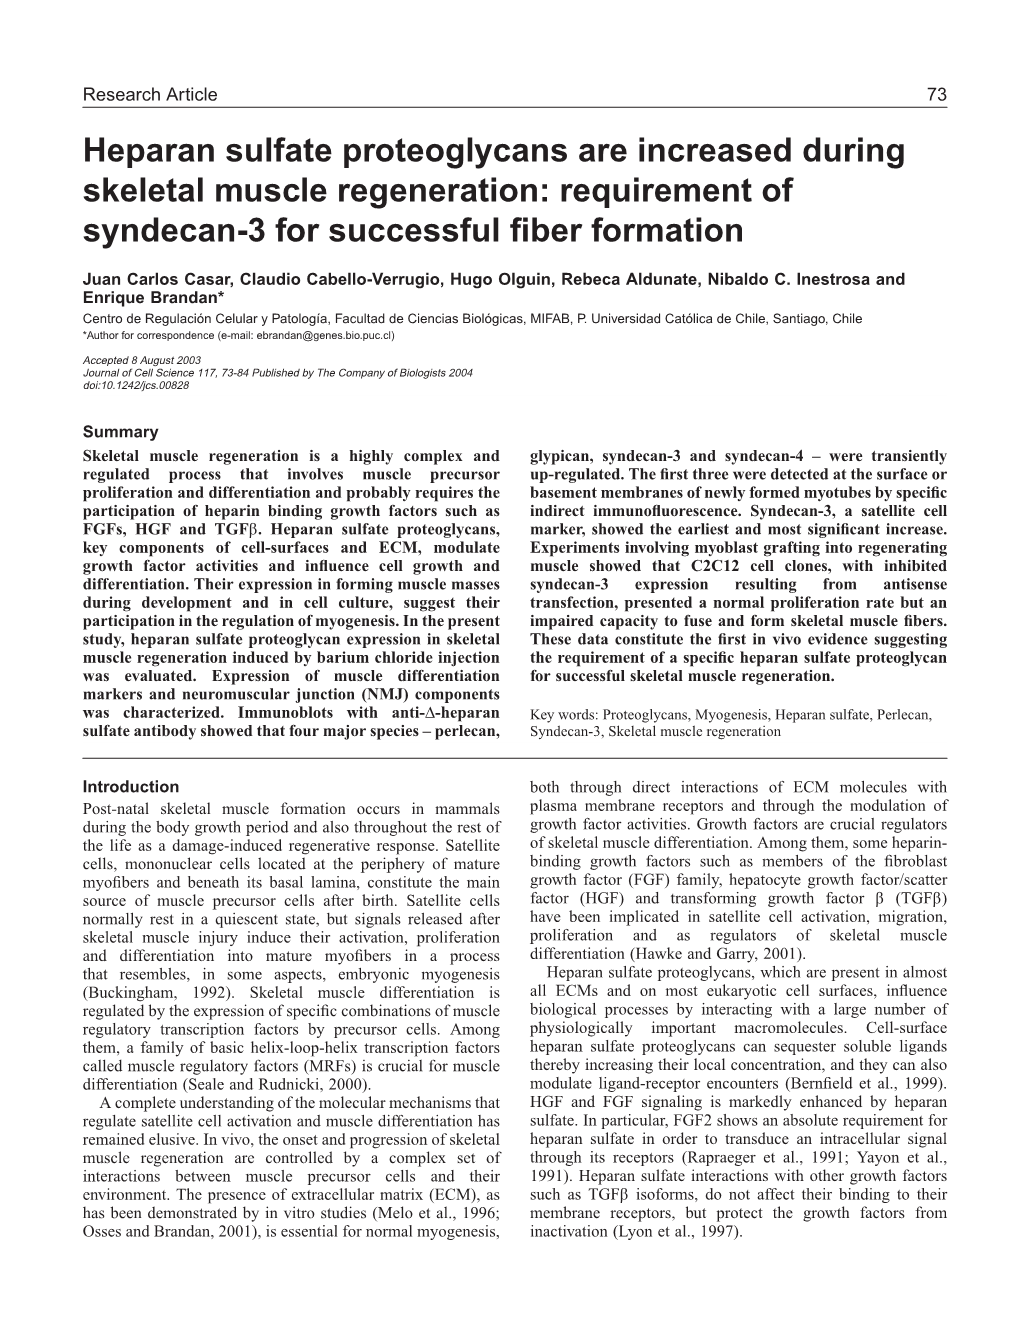 Heparan Sulfate Proteoglycans Are Increased During Skeletal Muscle Regeneration: Requirement of Syndecan-3 for Successful ﬁber Formation